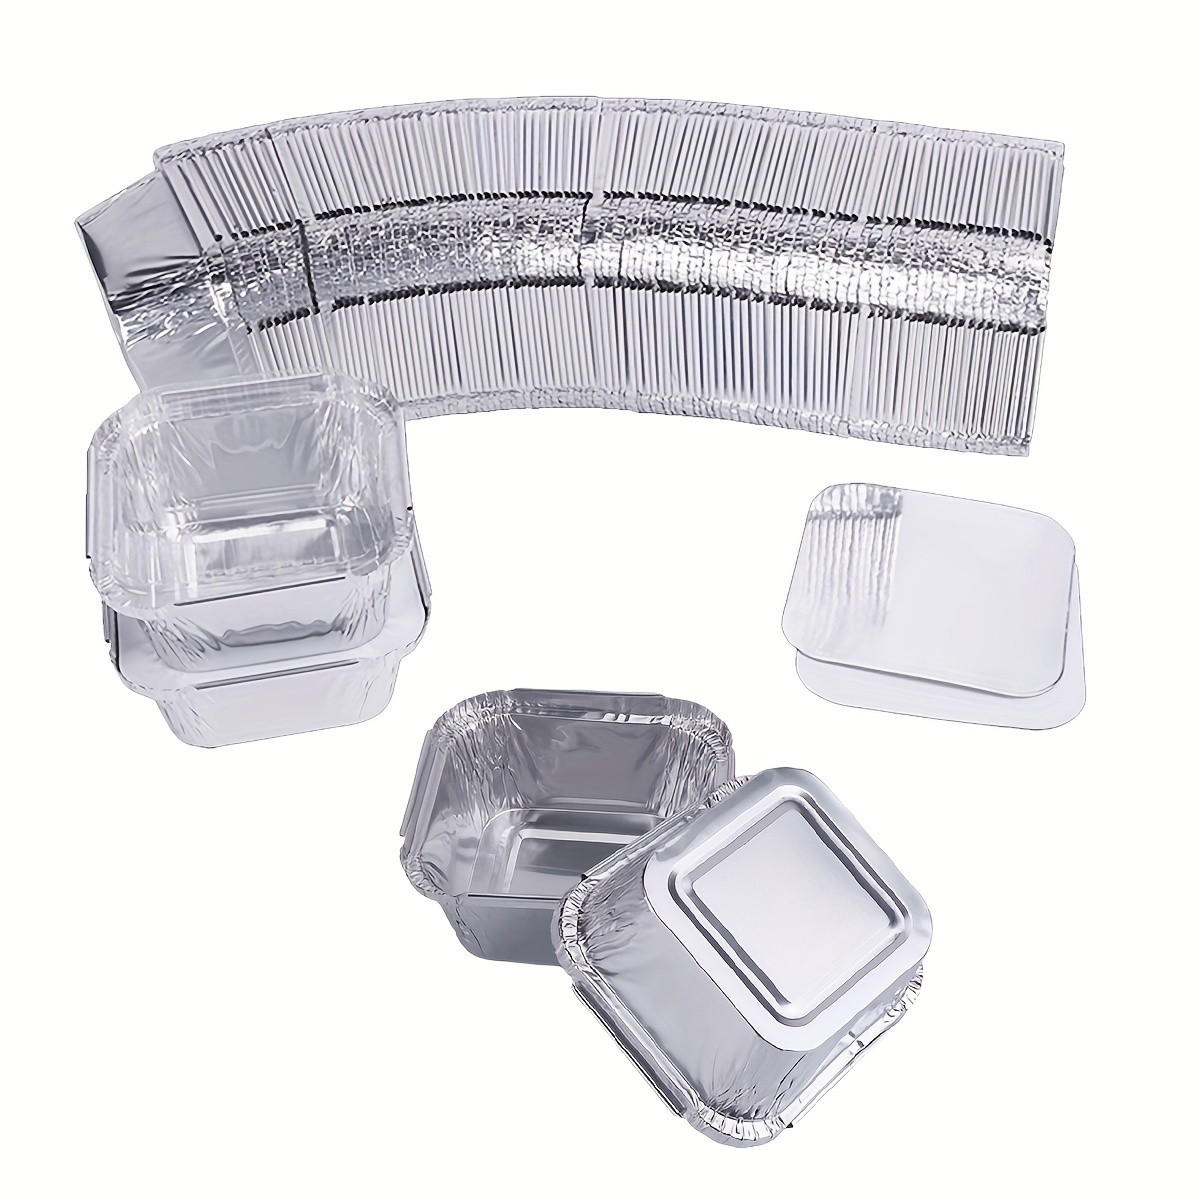 Disposable Aluminum Foil Steam Roaster Pans Heavy Duty Baking Roasting  Broiling 20 X 13 X 3 (60)